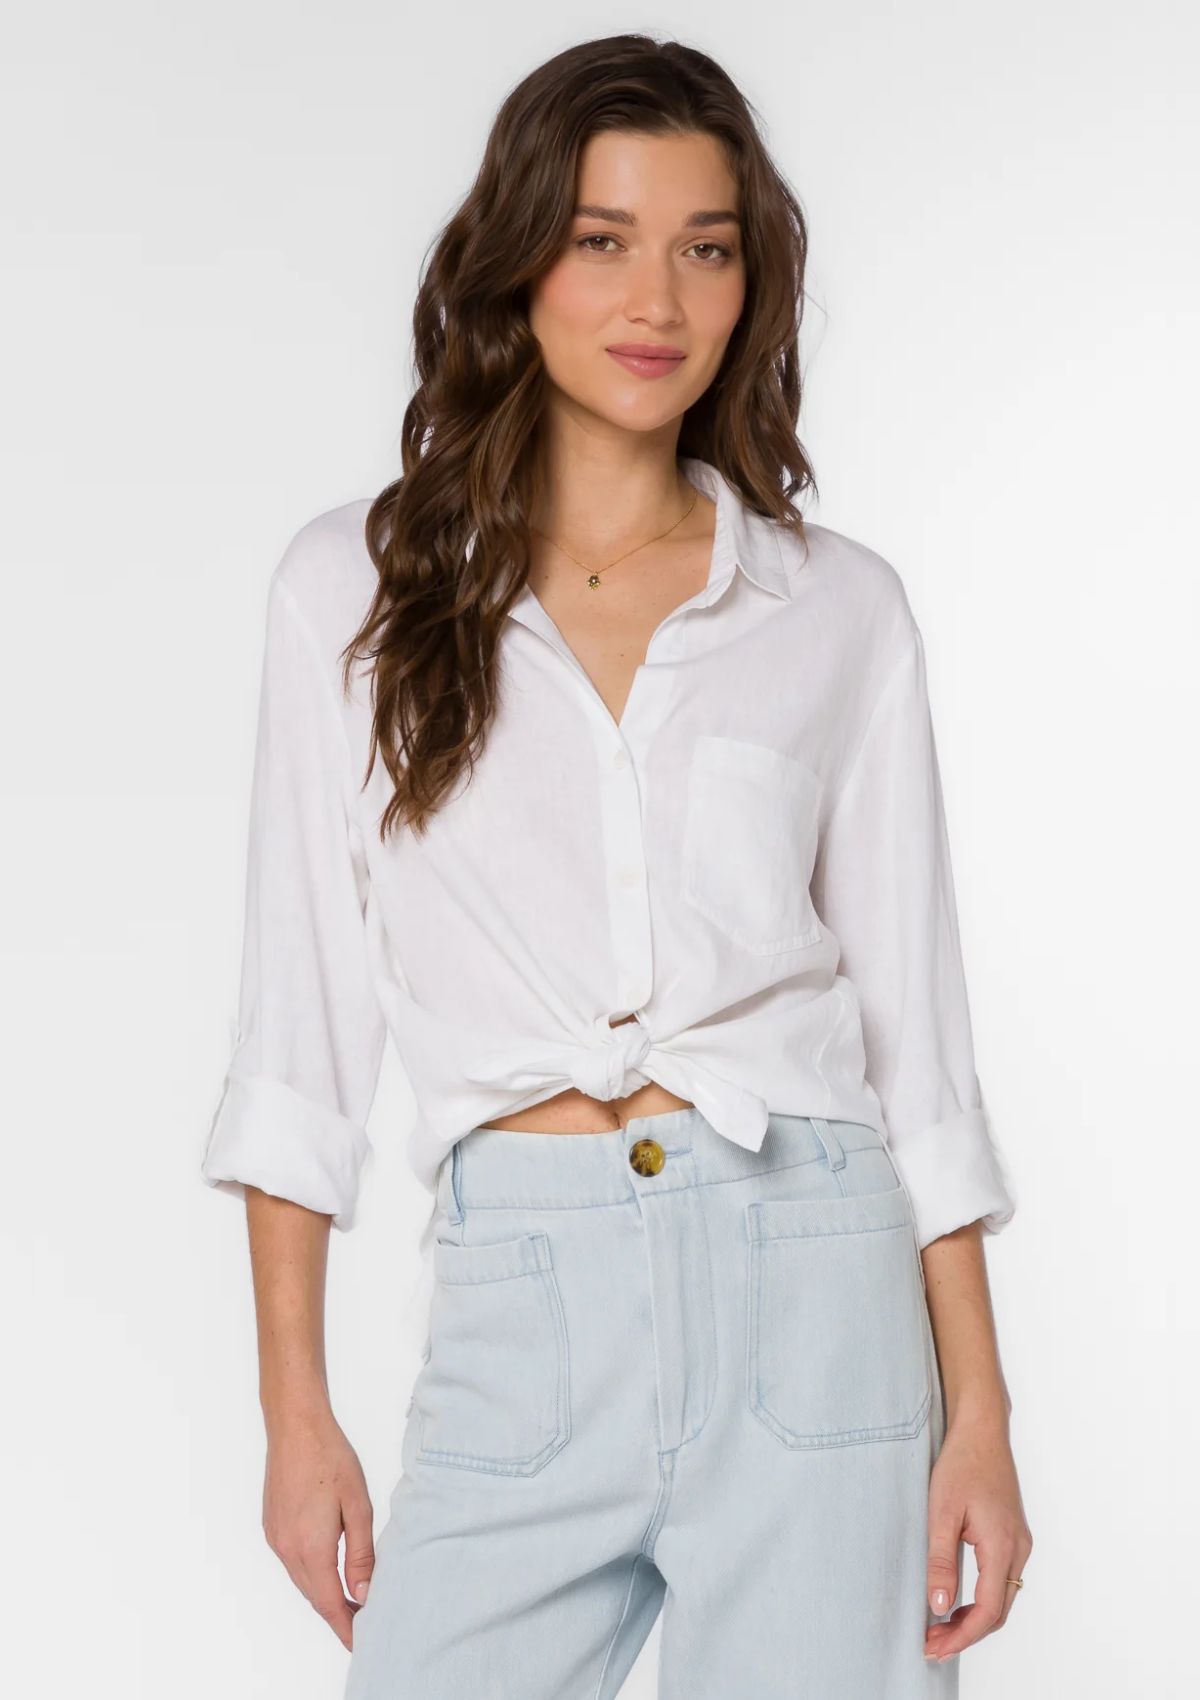 Blouses-Casual Tops-Clothing-Ruby Jane.